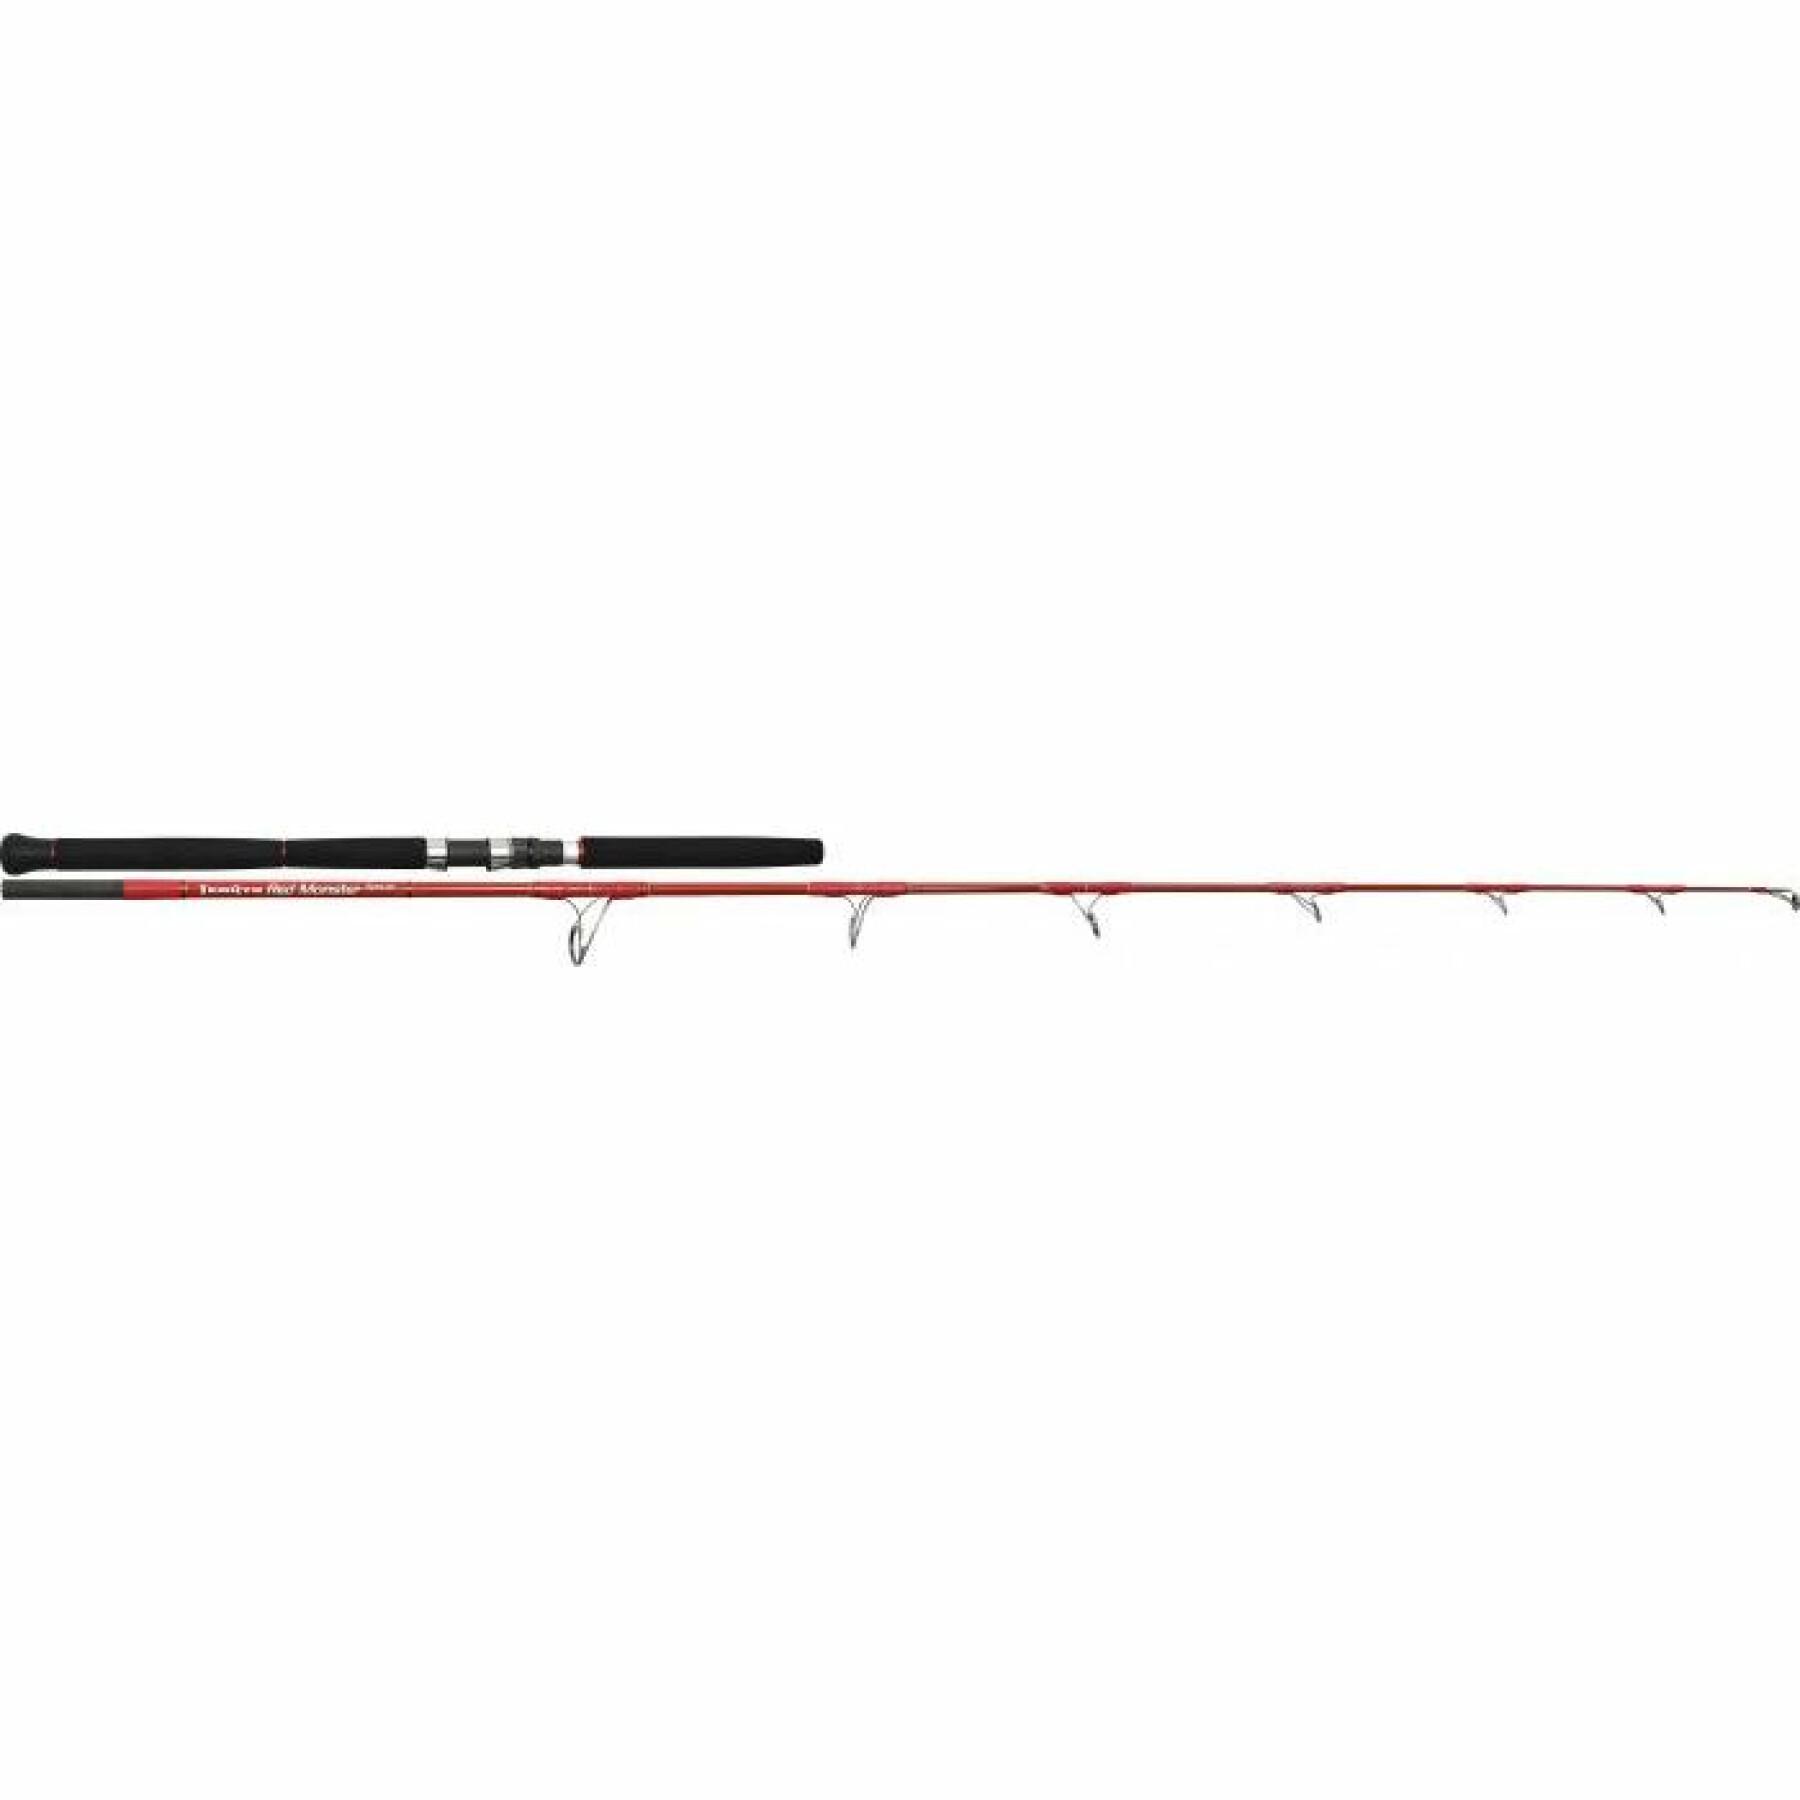 Canna da spinning Tenryu Red Monster Special 80-200g